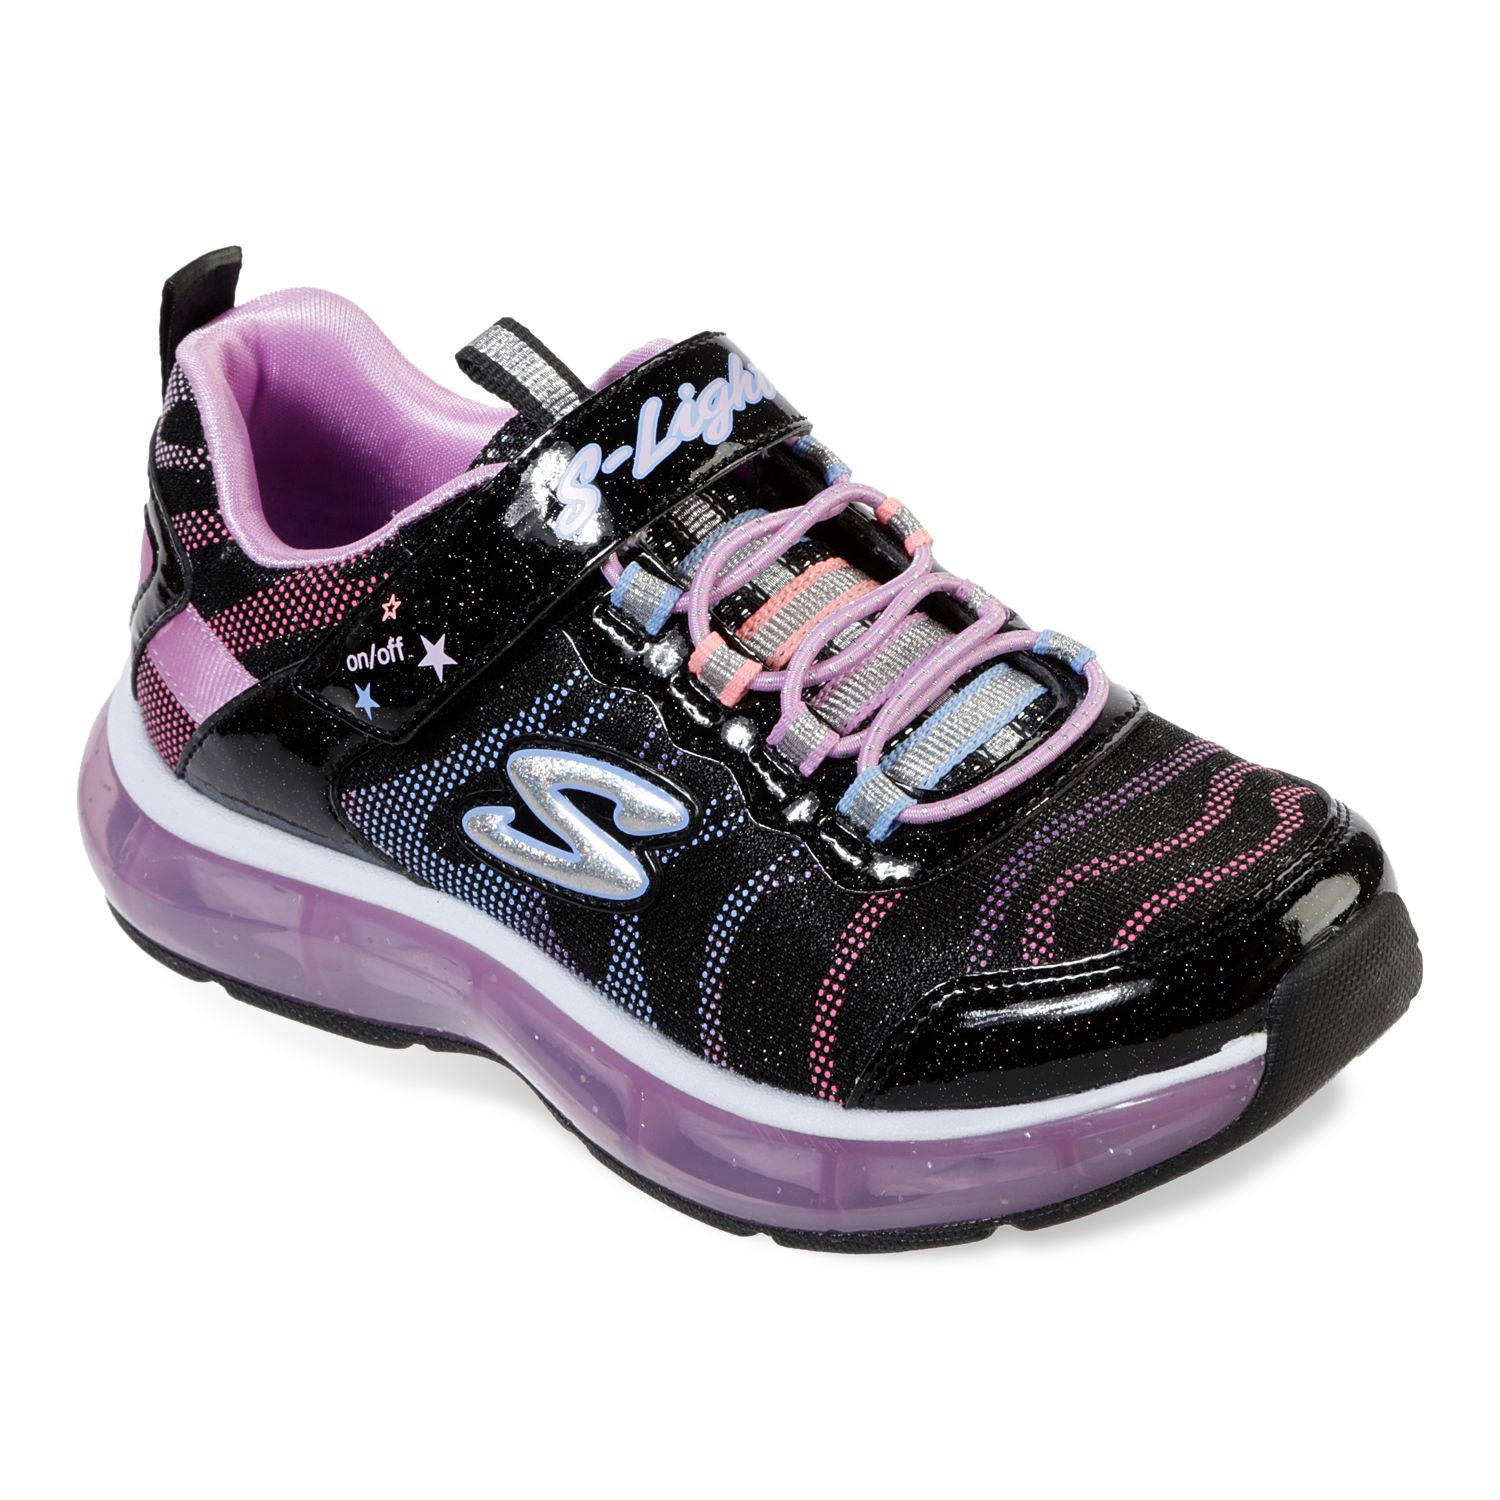 skechers light up shoes for toddlers